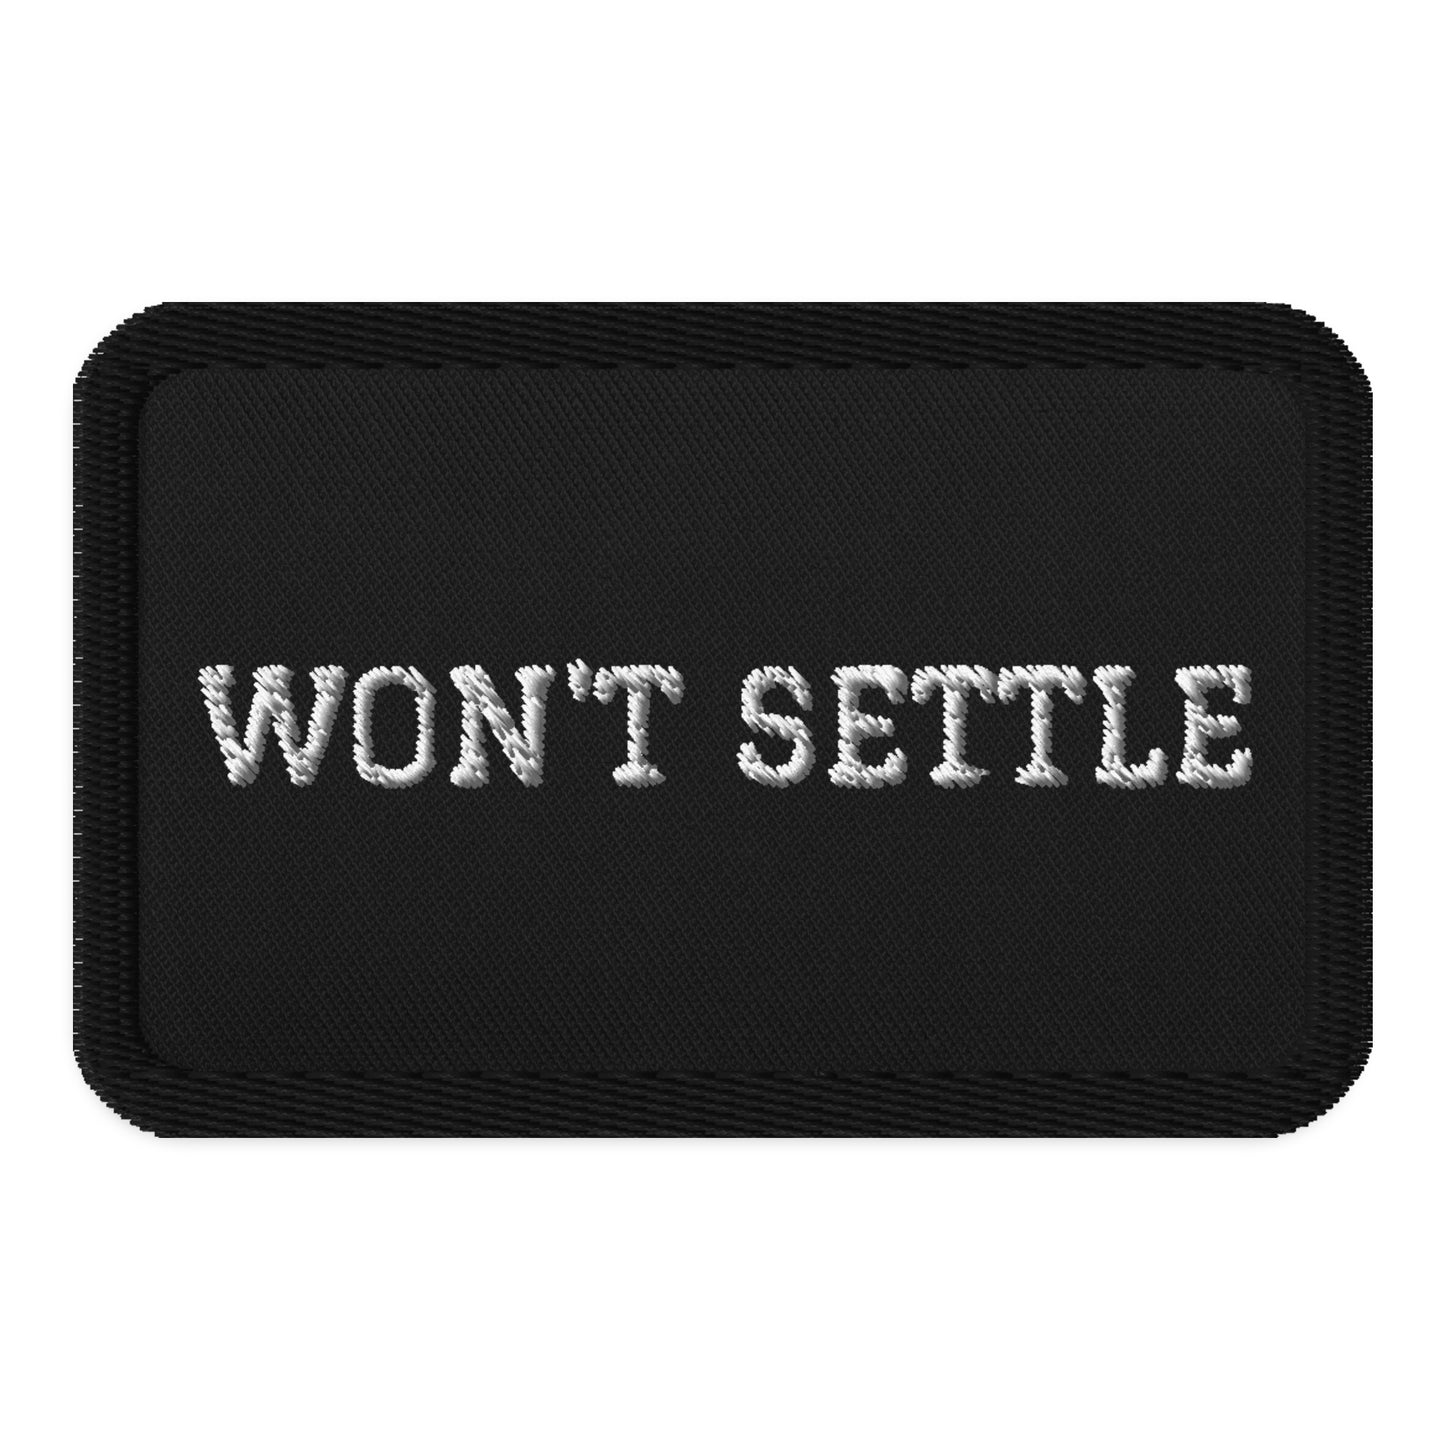 WON'T SETTLE Embroidered patches